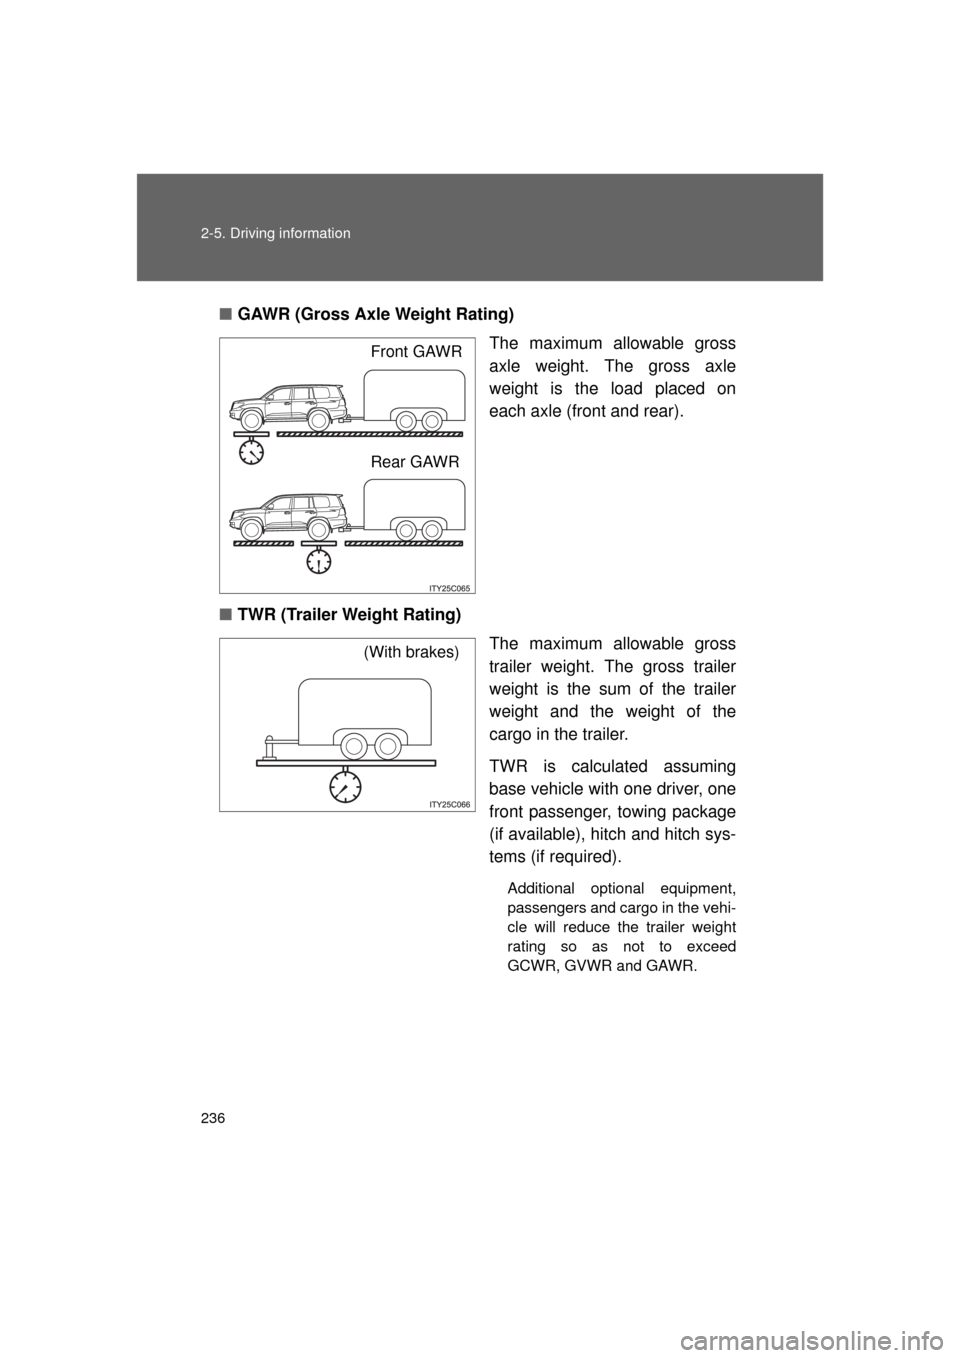 TOYOTA LAND CRUISER 2011 J200 Owners Manual 236 2-5. Driving information
L/C200_U (OM60F74U)■
GAWR (Gross Axle Weight Rating)
The maximum allowable gross
axle weight. The gross axle
weight is the load placed on
each axle (front and rear).
■